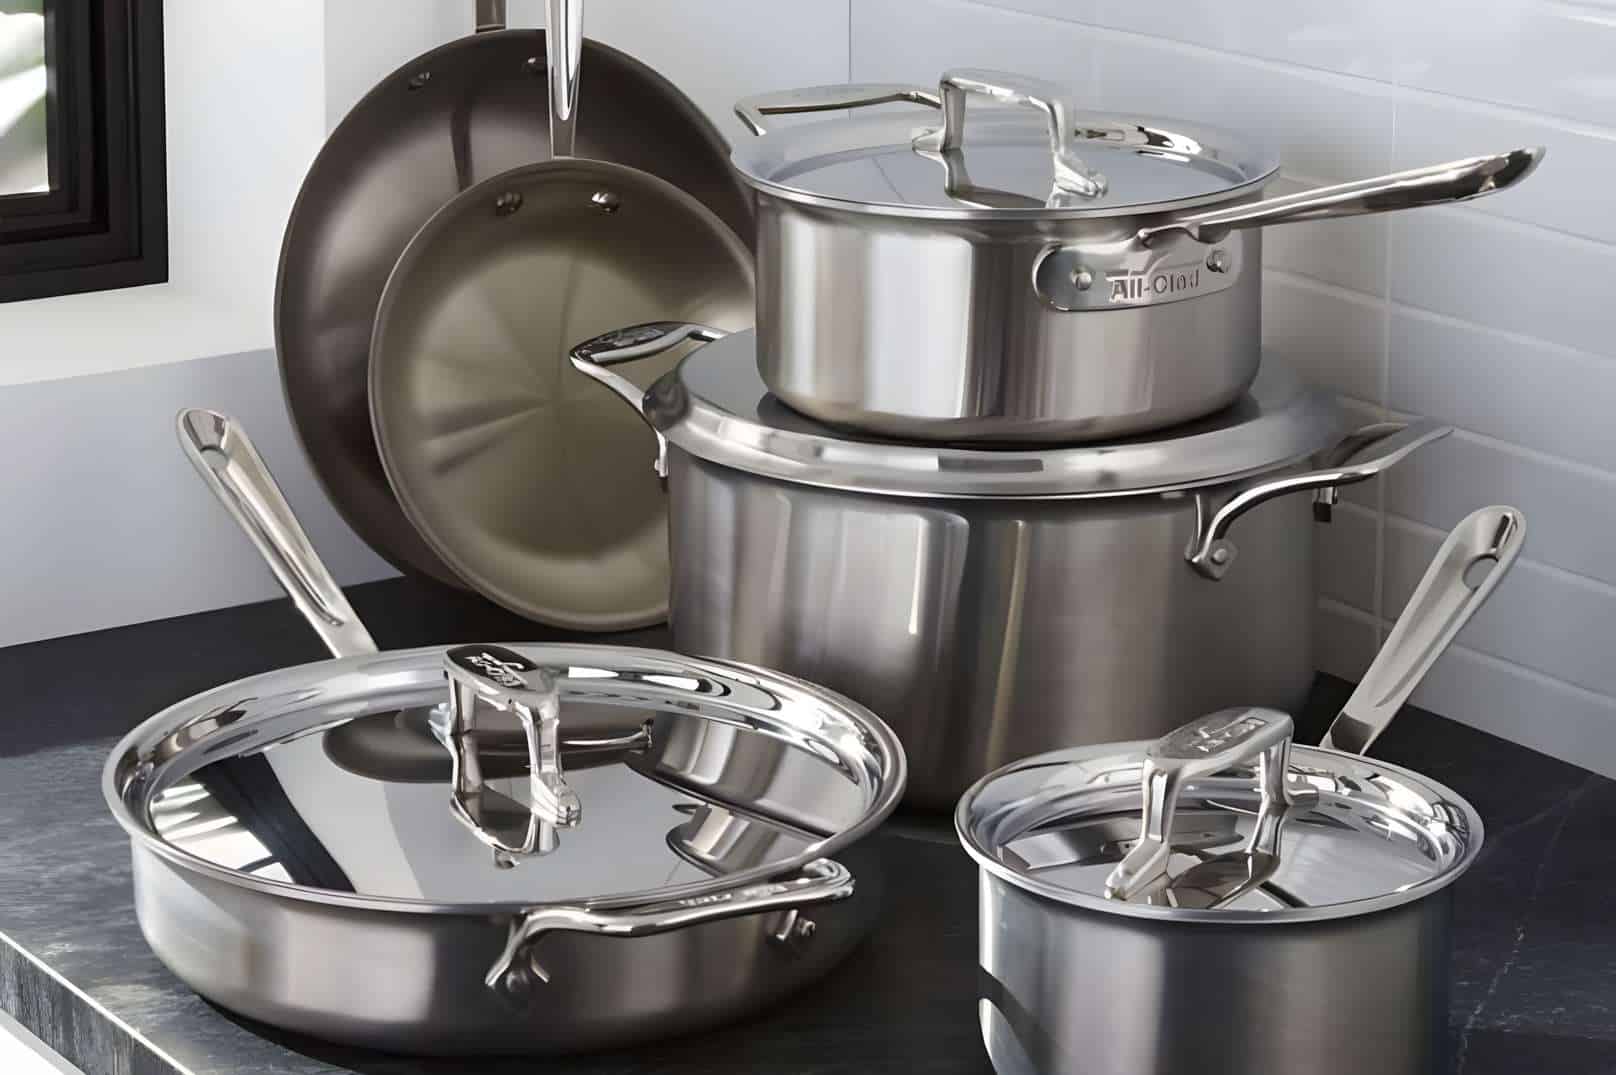 A brief overview about All-Clad Cookware